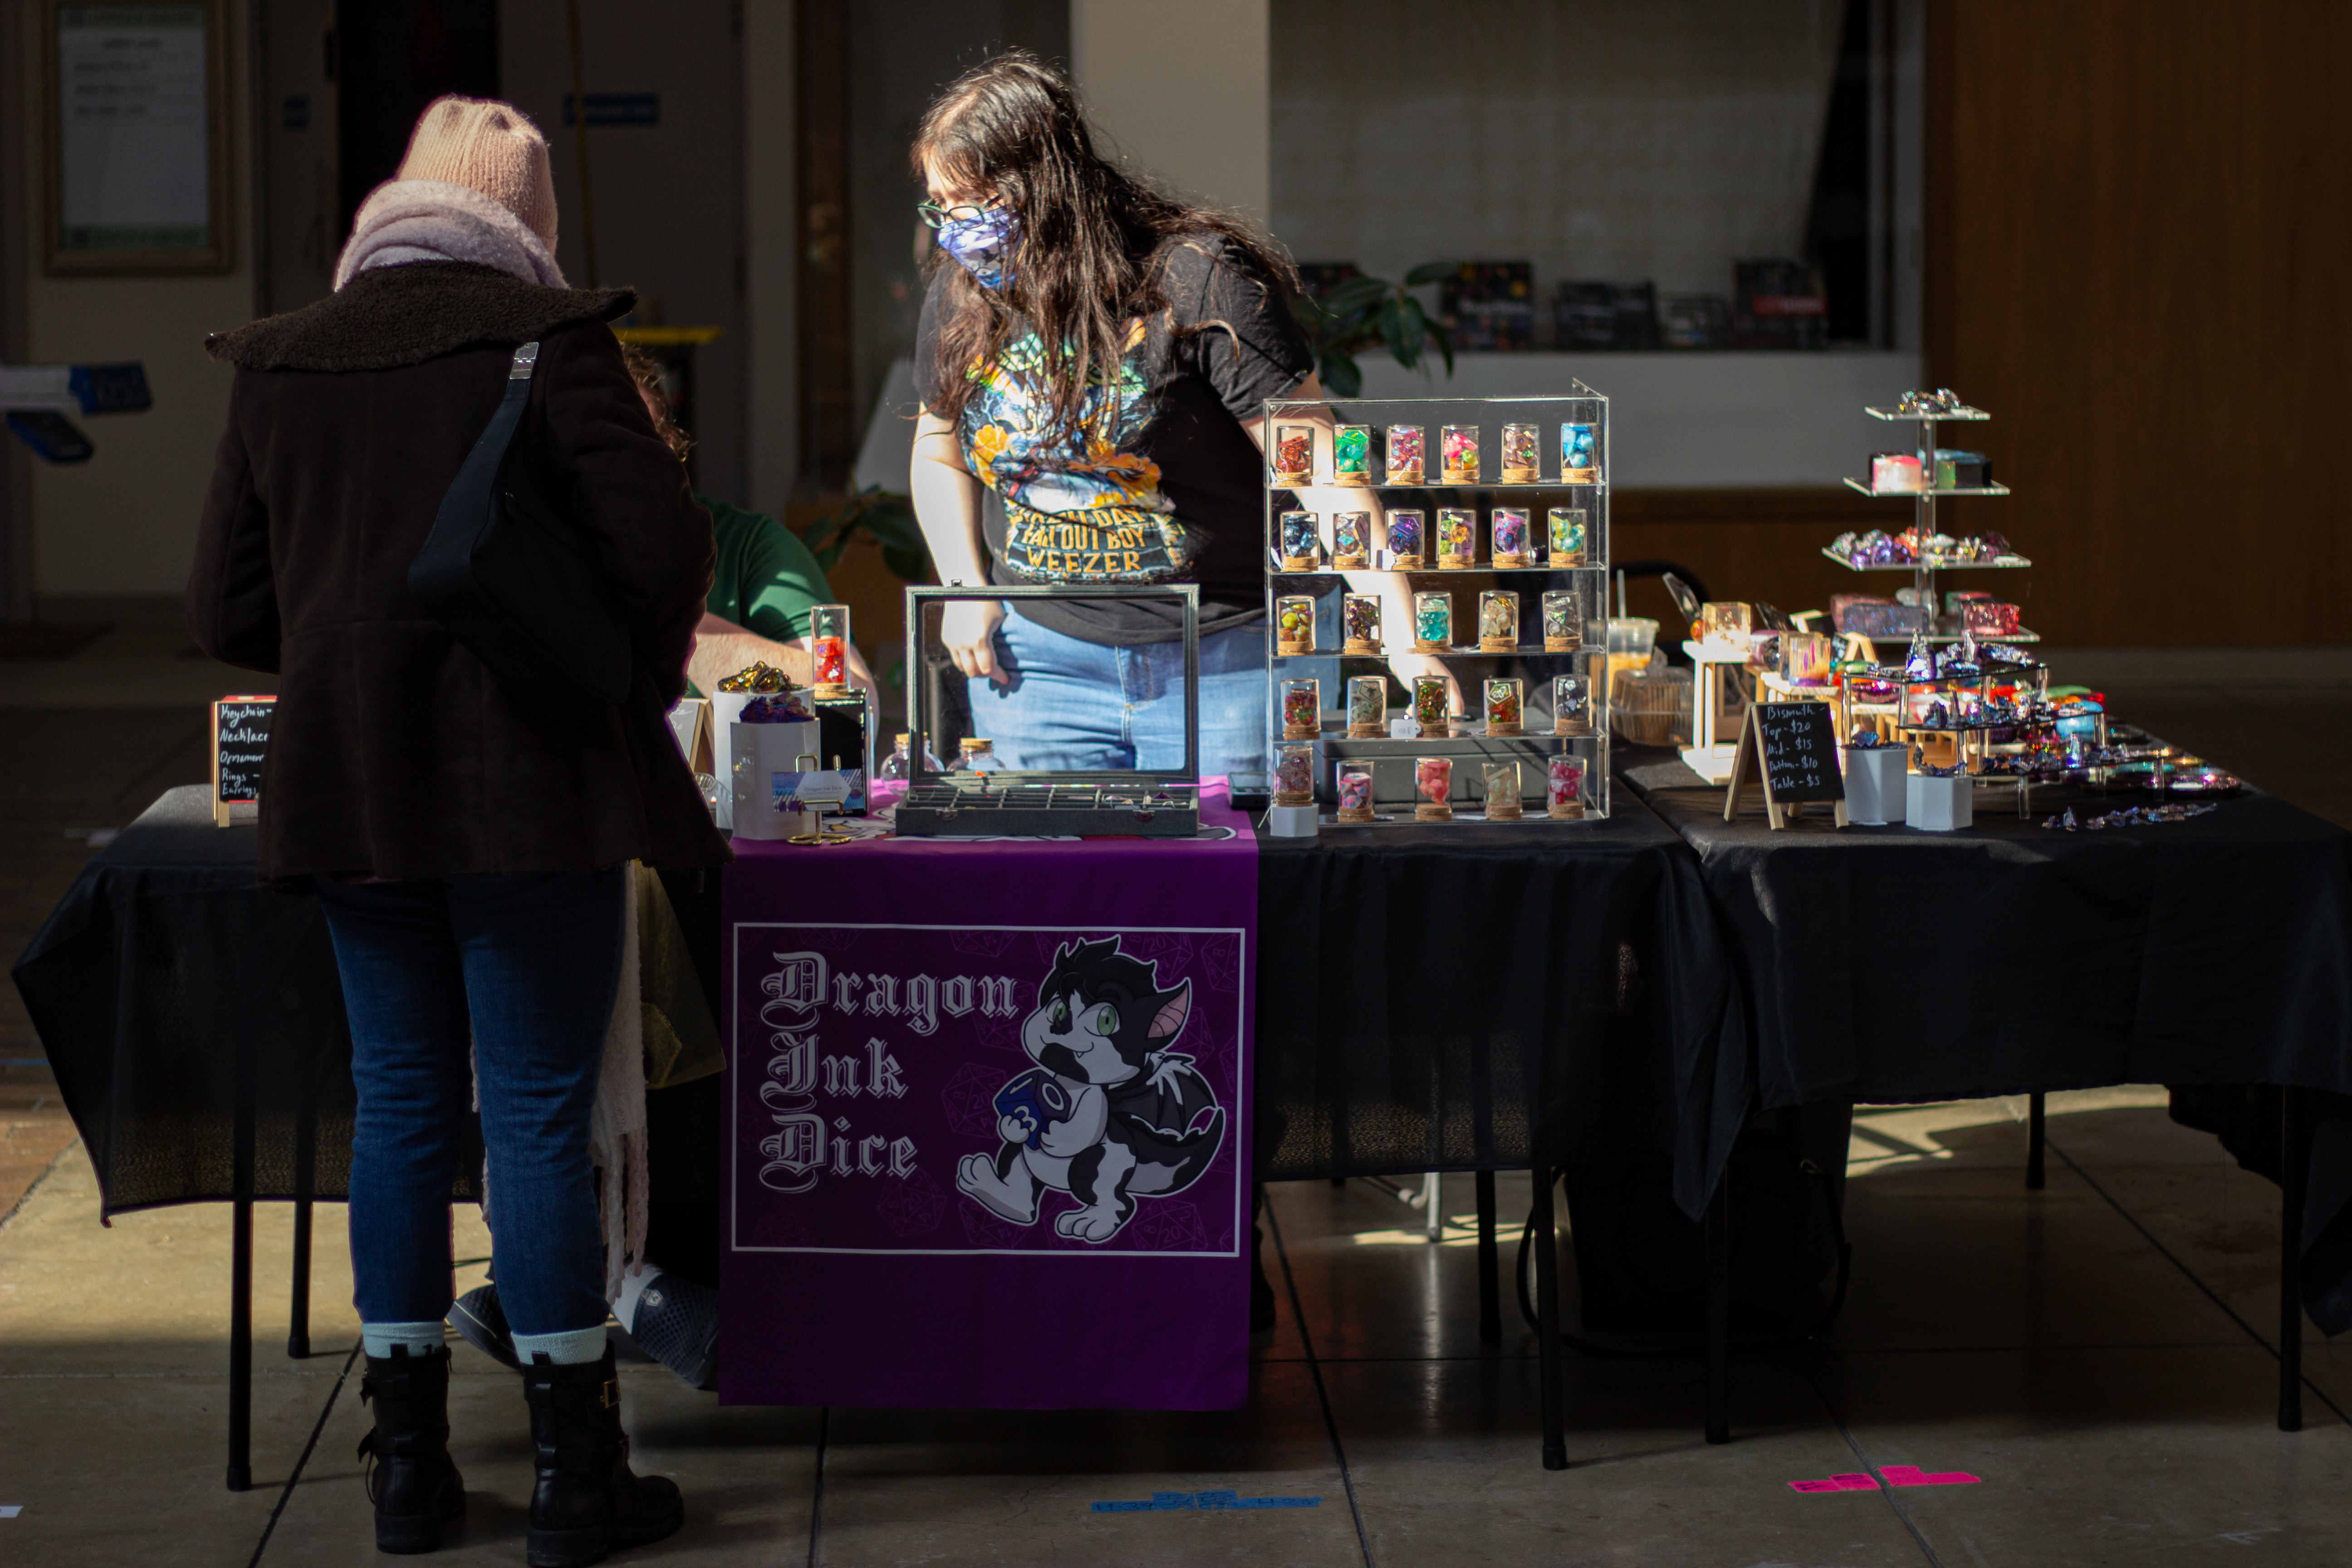 A view directly in front of the Dragon Ink Dice table. The vendor is helping out a shopper. There are an assortment of dice displayed on a shelf. Next to the shelf is a box full of more dice. The right side of the table is where the Bismuth, ashtrays, jewelry boxes, and other accessories are displayed. Photo by Jorge Murga.